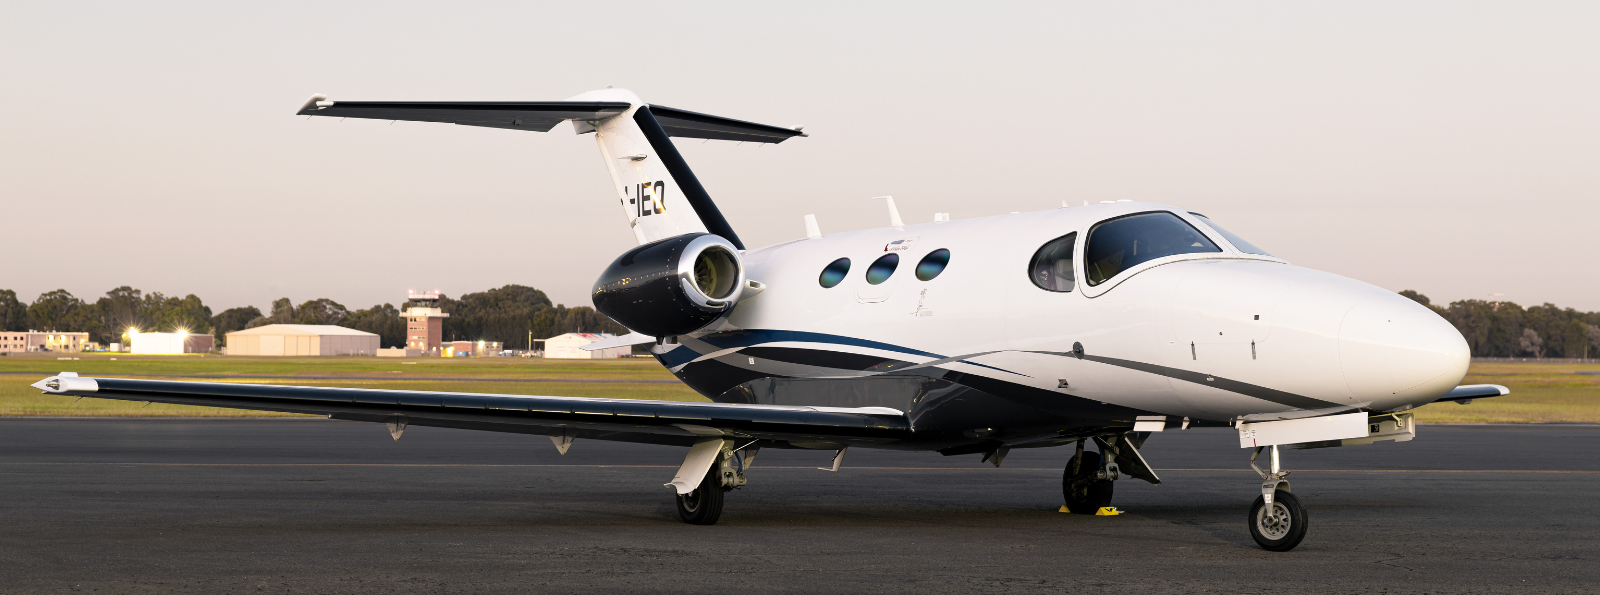 The plane you could be taking! A Citation Mustang (Source: Supplied)